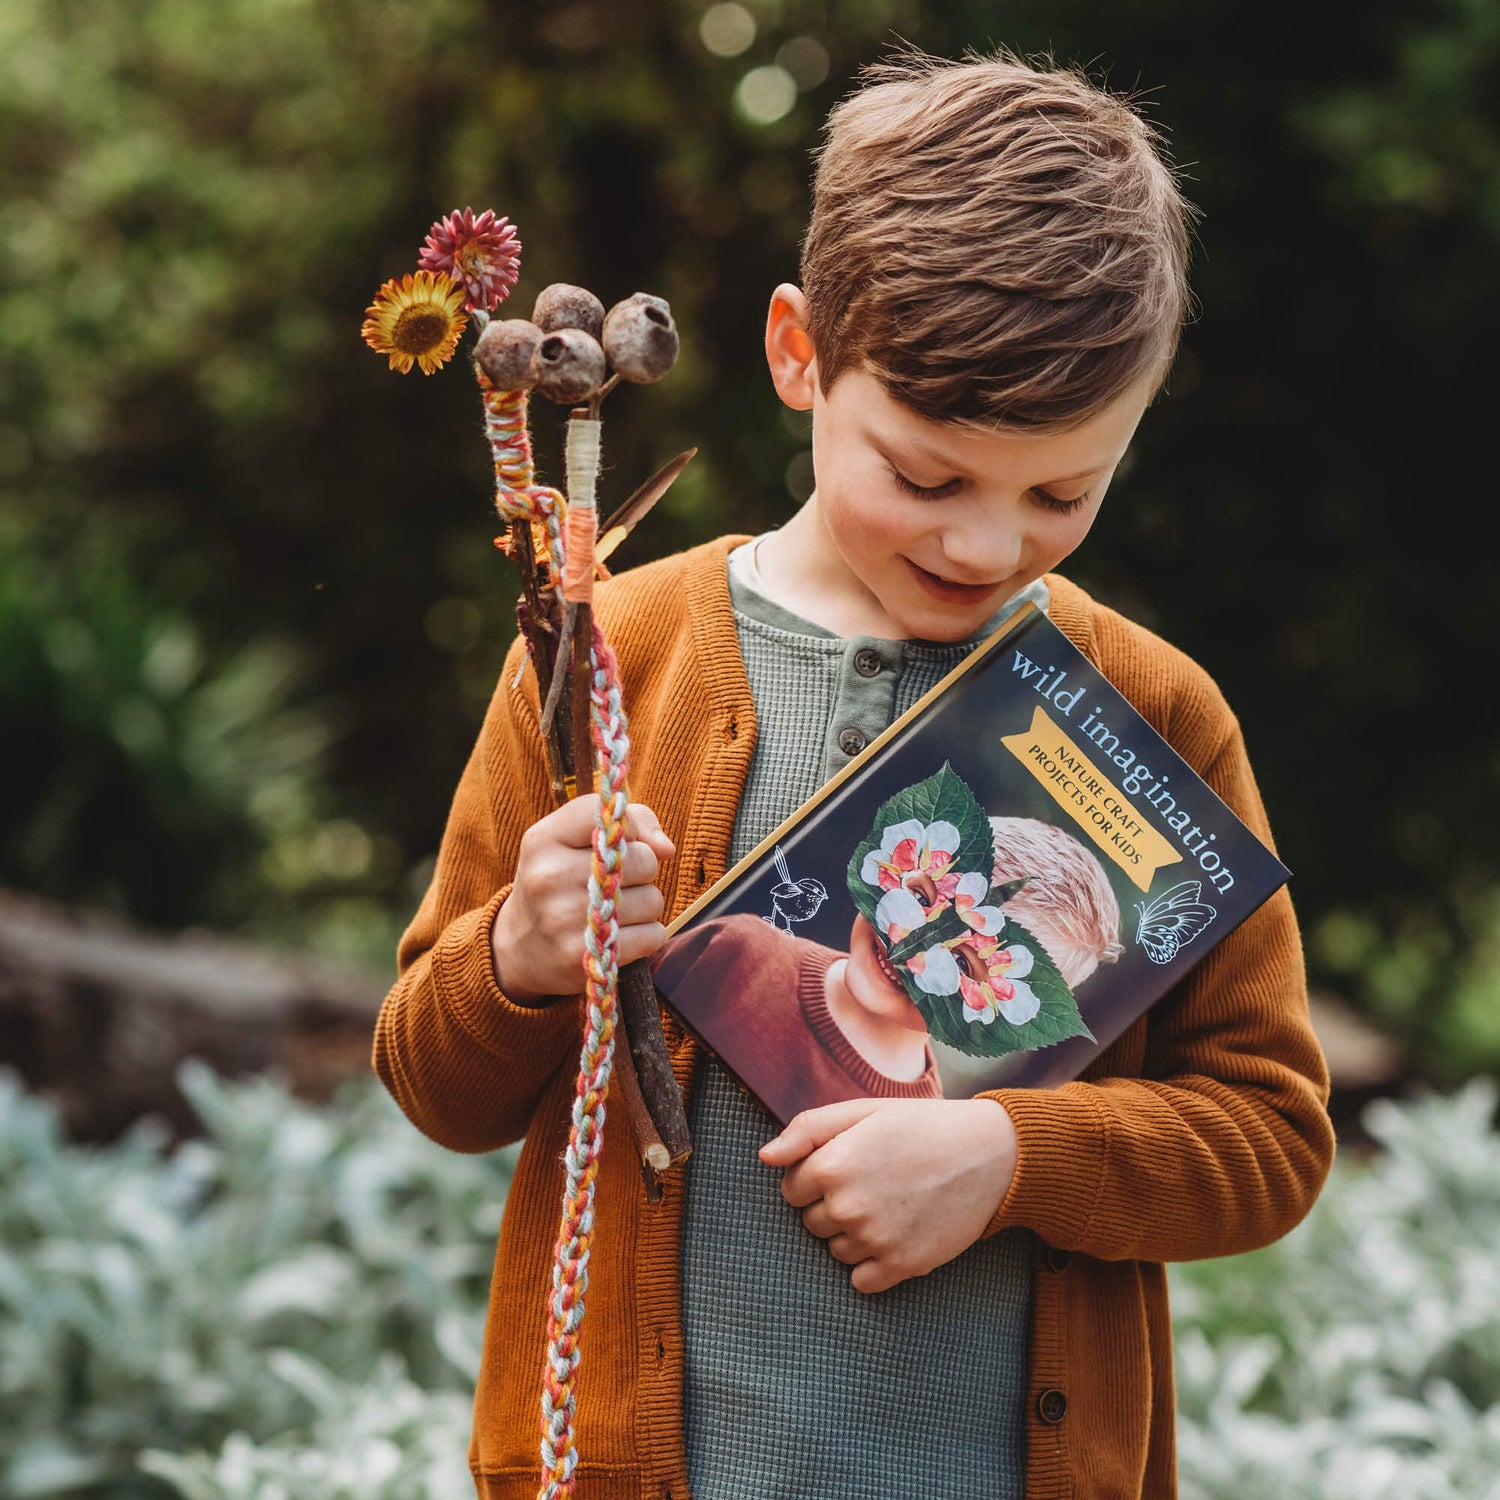 Boy holding magic wands made from nature and Wild Imagination, nature craft projects for kids book, made in Australia by Your Wild Books. 